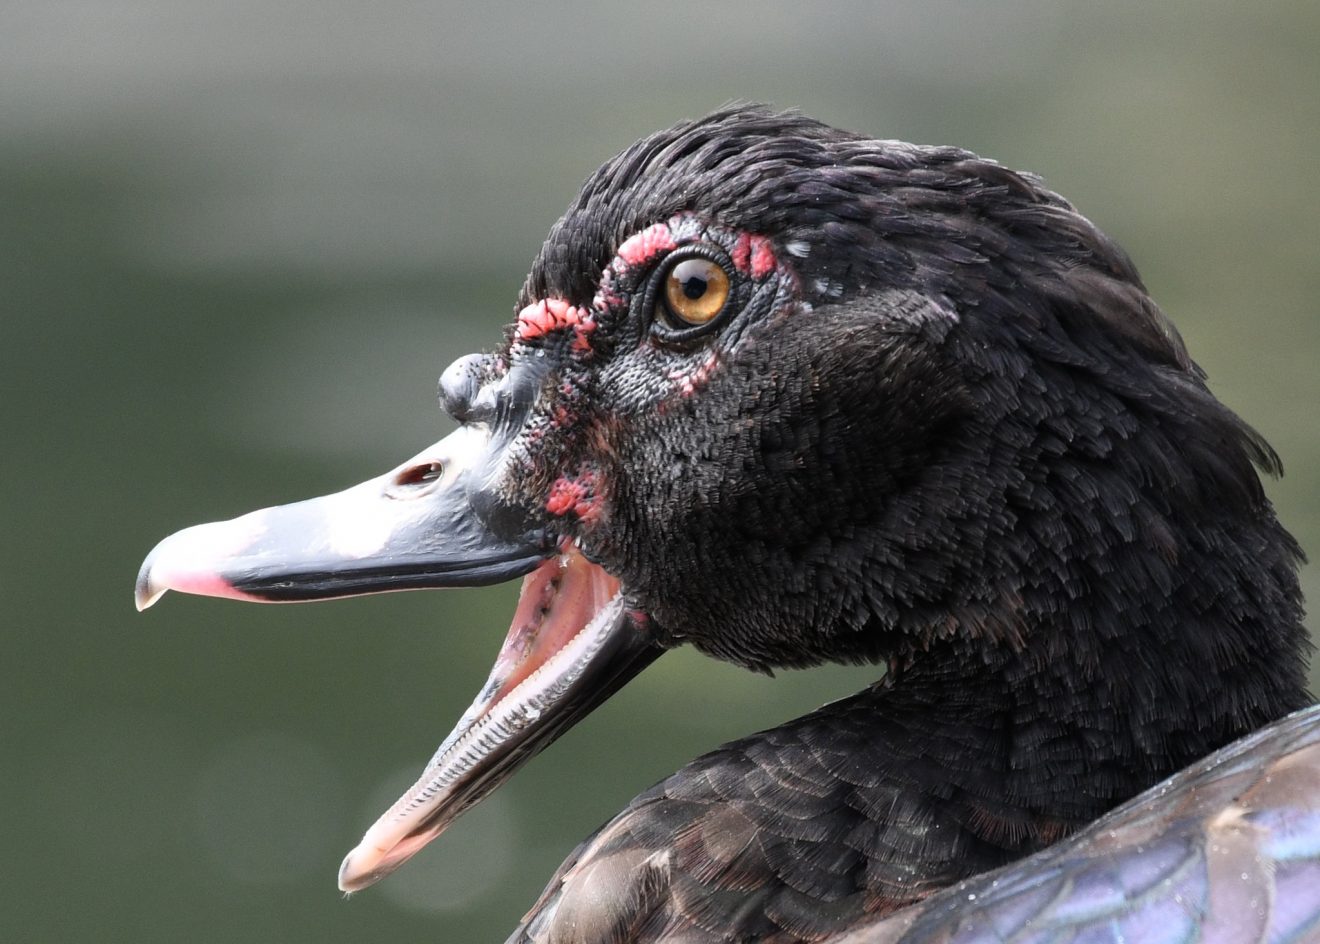 Photo by Grayson Smith/U.S. Fish and Wildlife Service. Muscovy ducks are among the bird species that an international research team studied as part of a project to track and predict avian influenza.